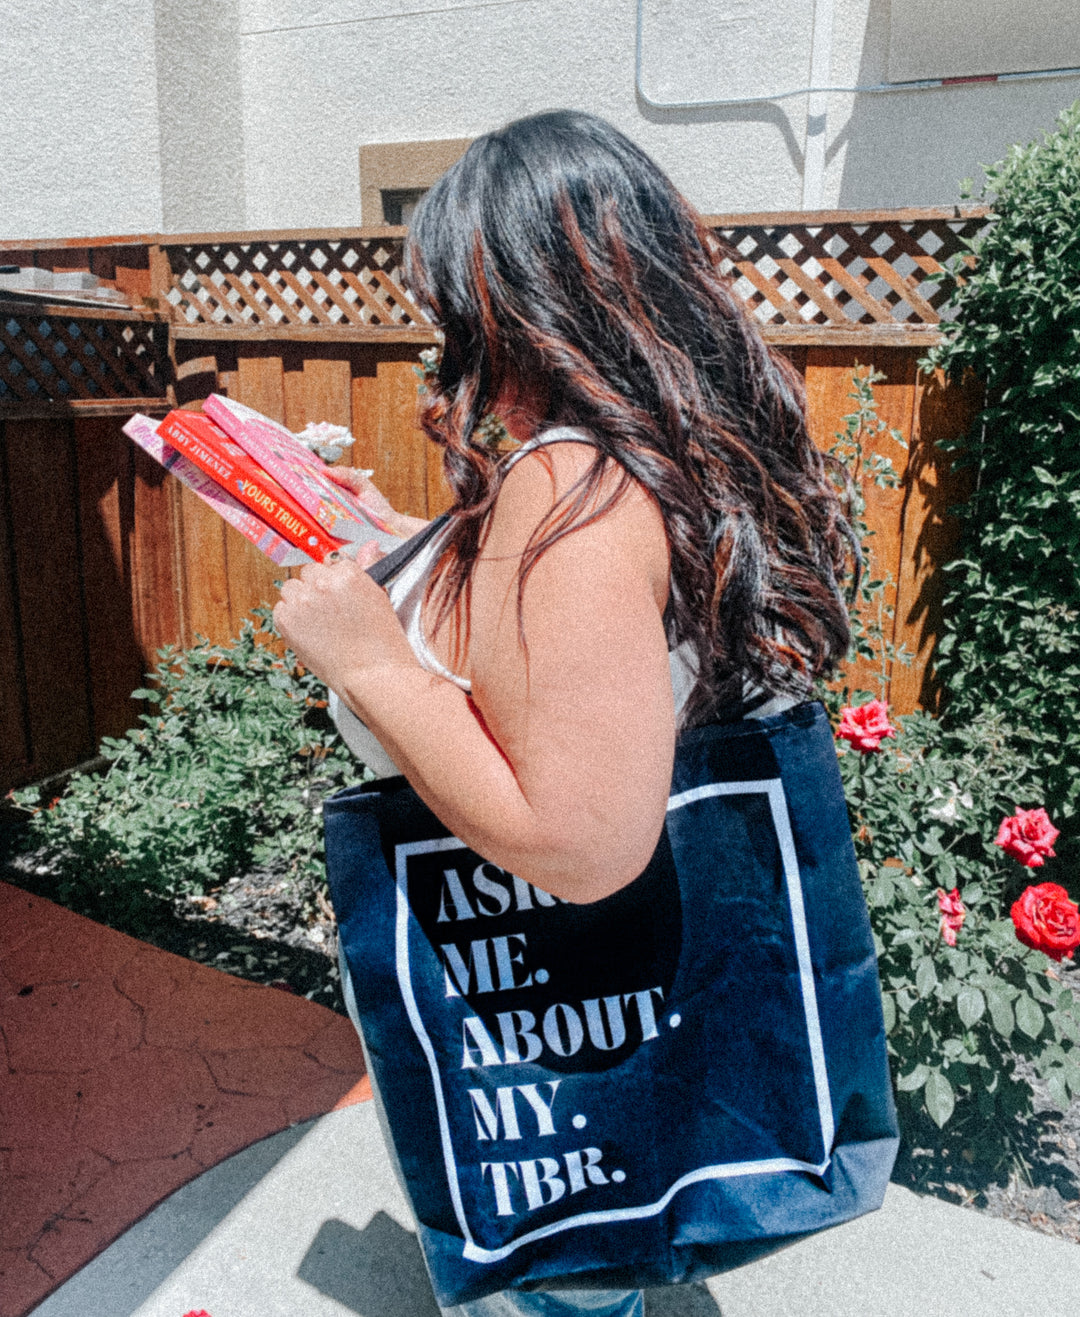 Ask me about my TBR Tote Bag